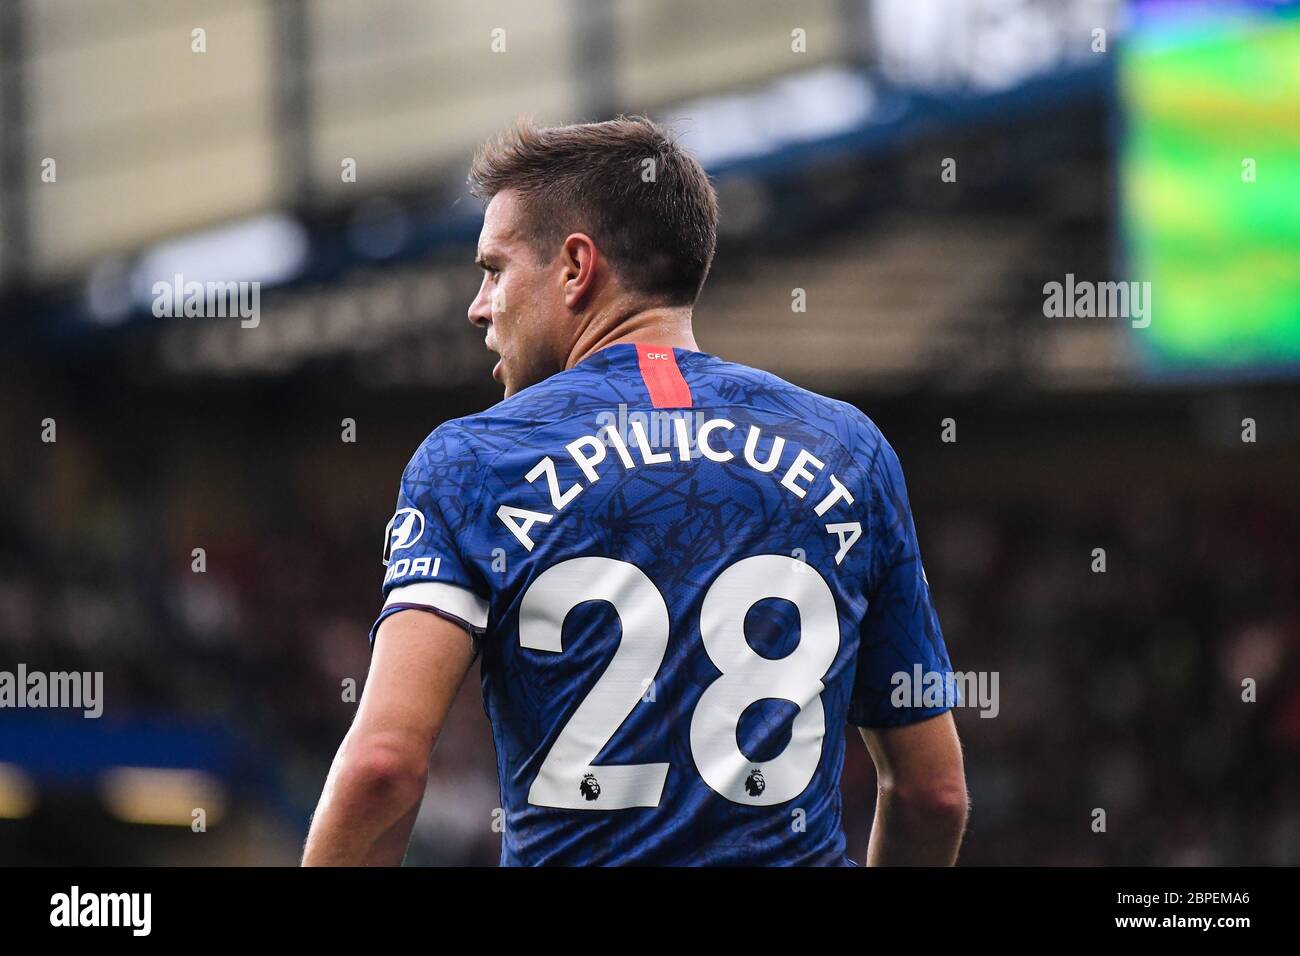 LONDON, ENGLAND - SEPTEMBER 22, 2019: Cesar Azpilicueta of Chelsea pictured during the 2019/20 Premier League game between Chelsea FC and Liverpool FC at Stamford Bridge. Stock Photo